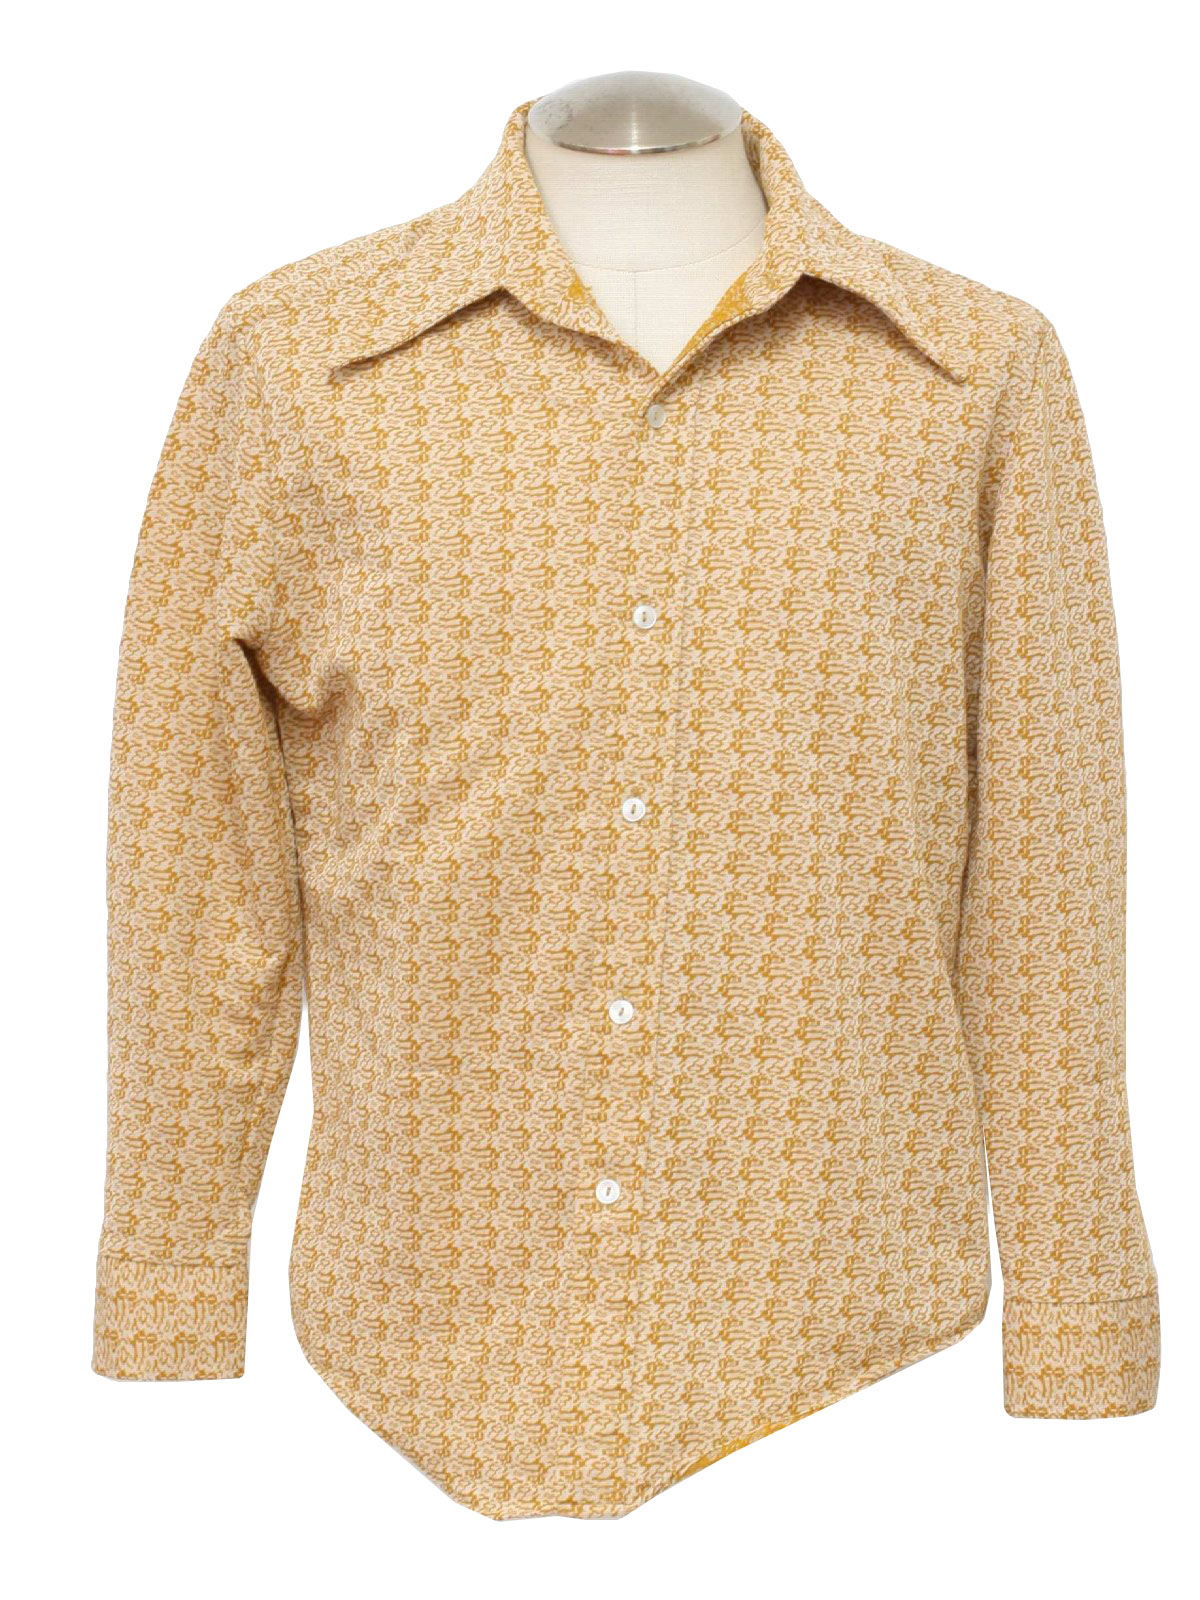 Towncraft 70's Vintage Shirt: 70s -Towncraft- Mens gold and white